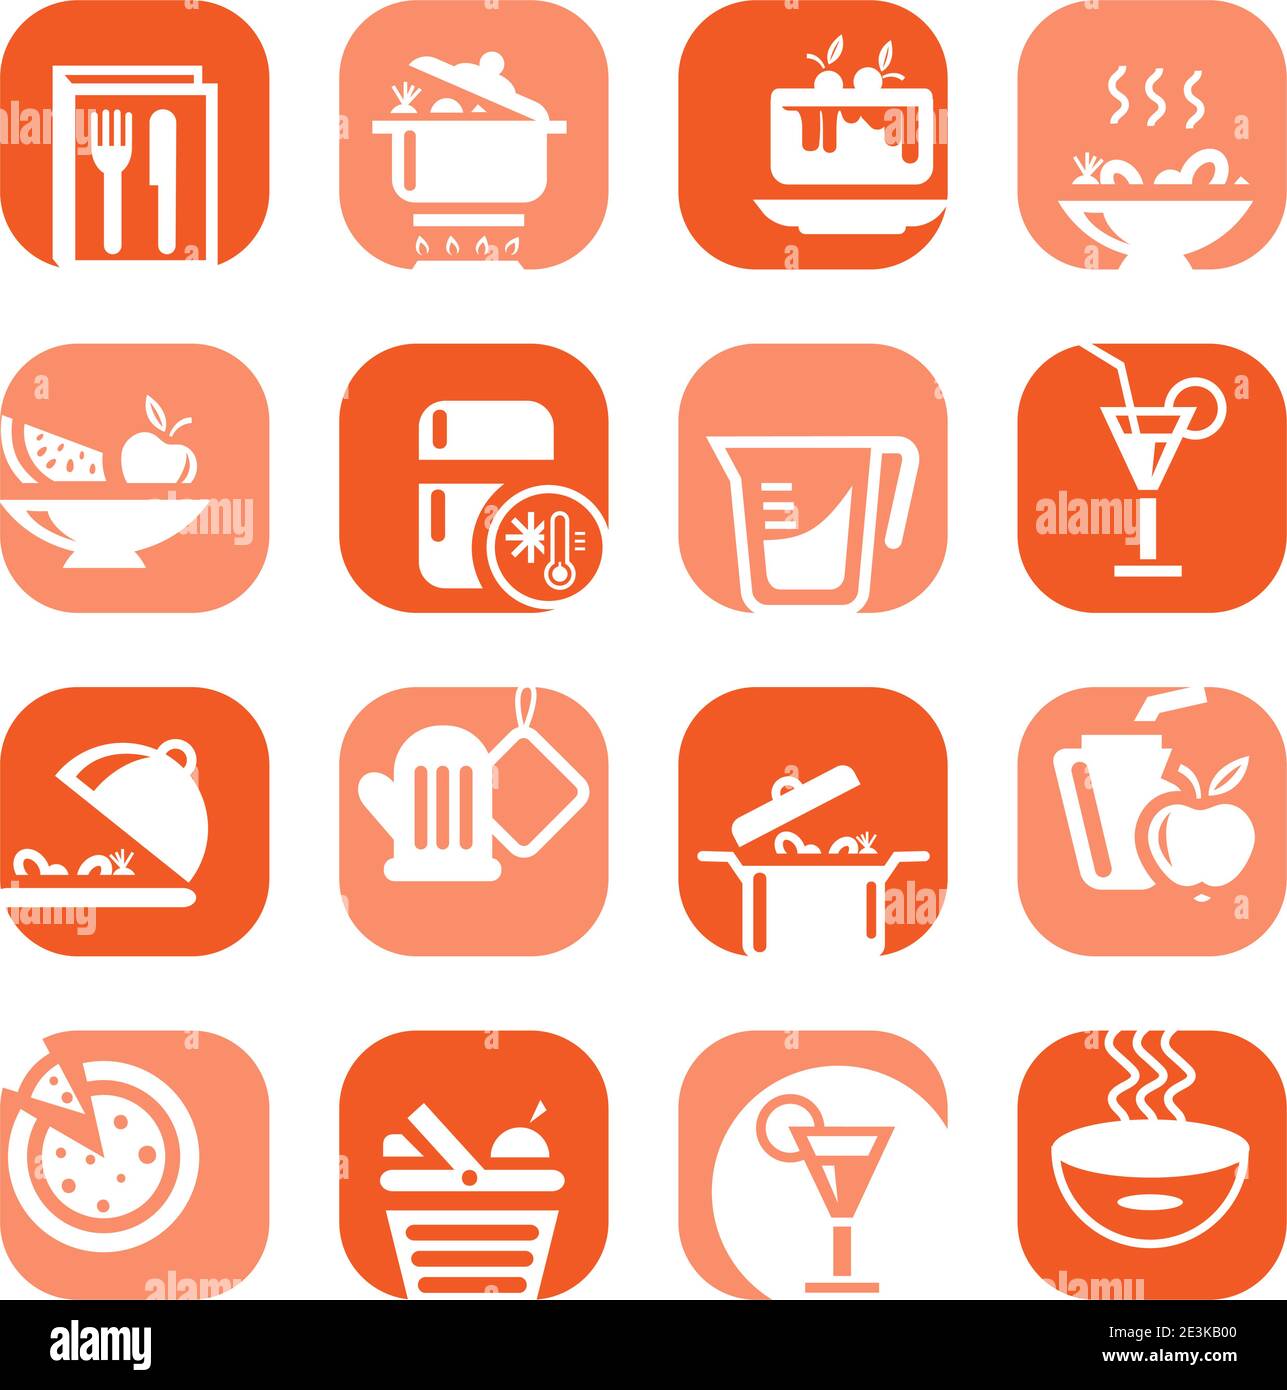 Elegant Colorful Food Icons Set Created For Mobile, Web And Applications. Stock Vector